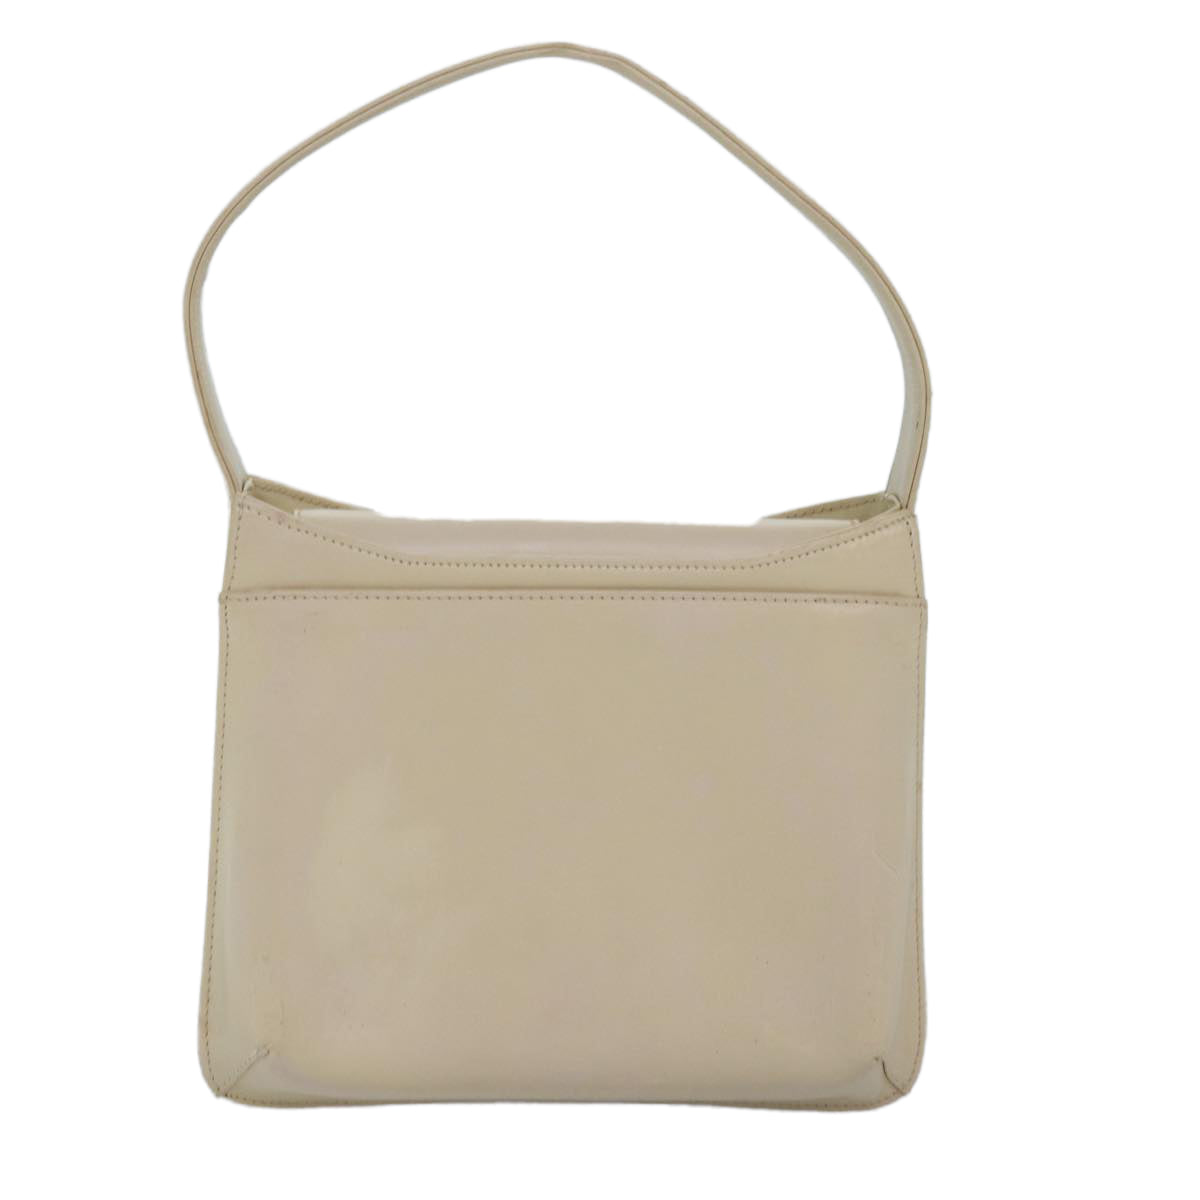 GIVENCHY Hand Bag Leather White Auth bs14154